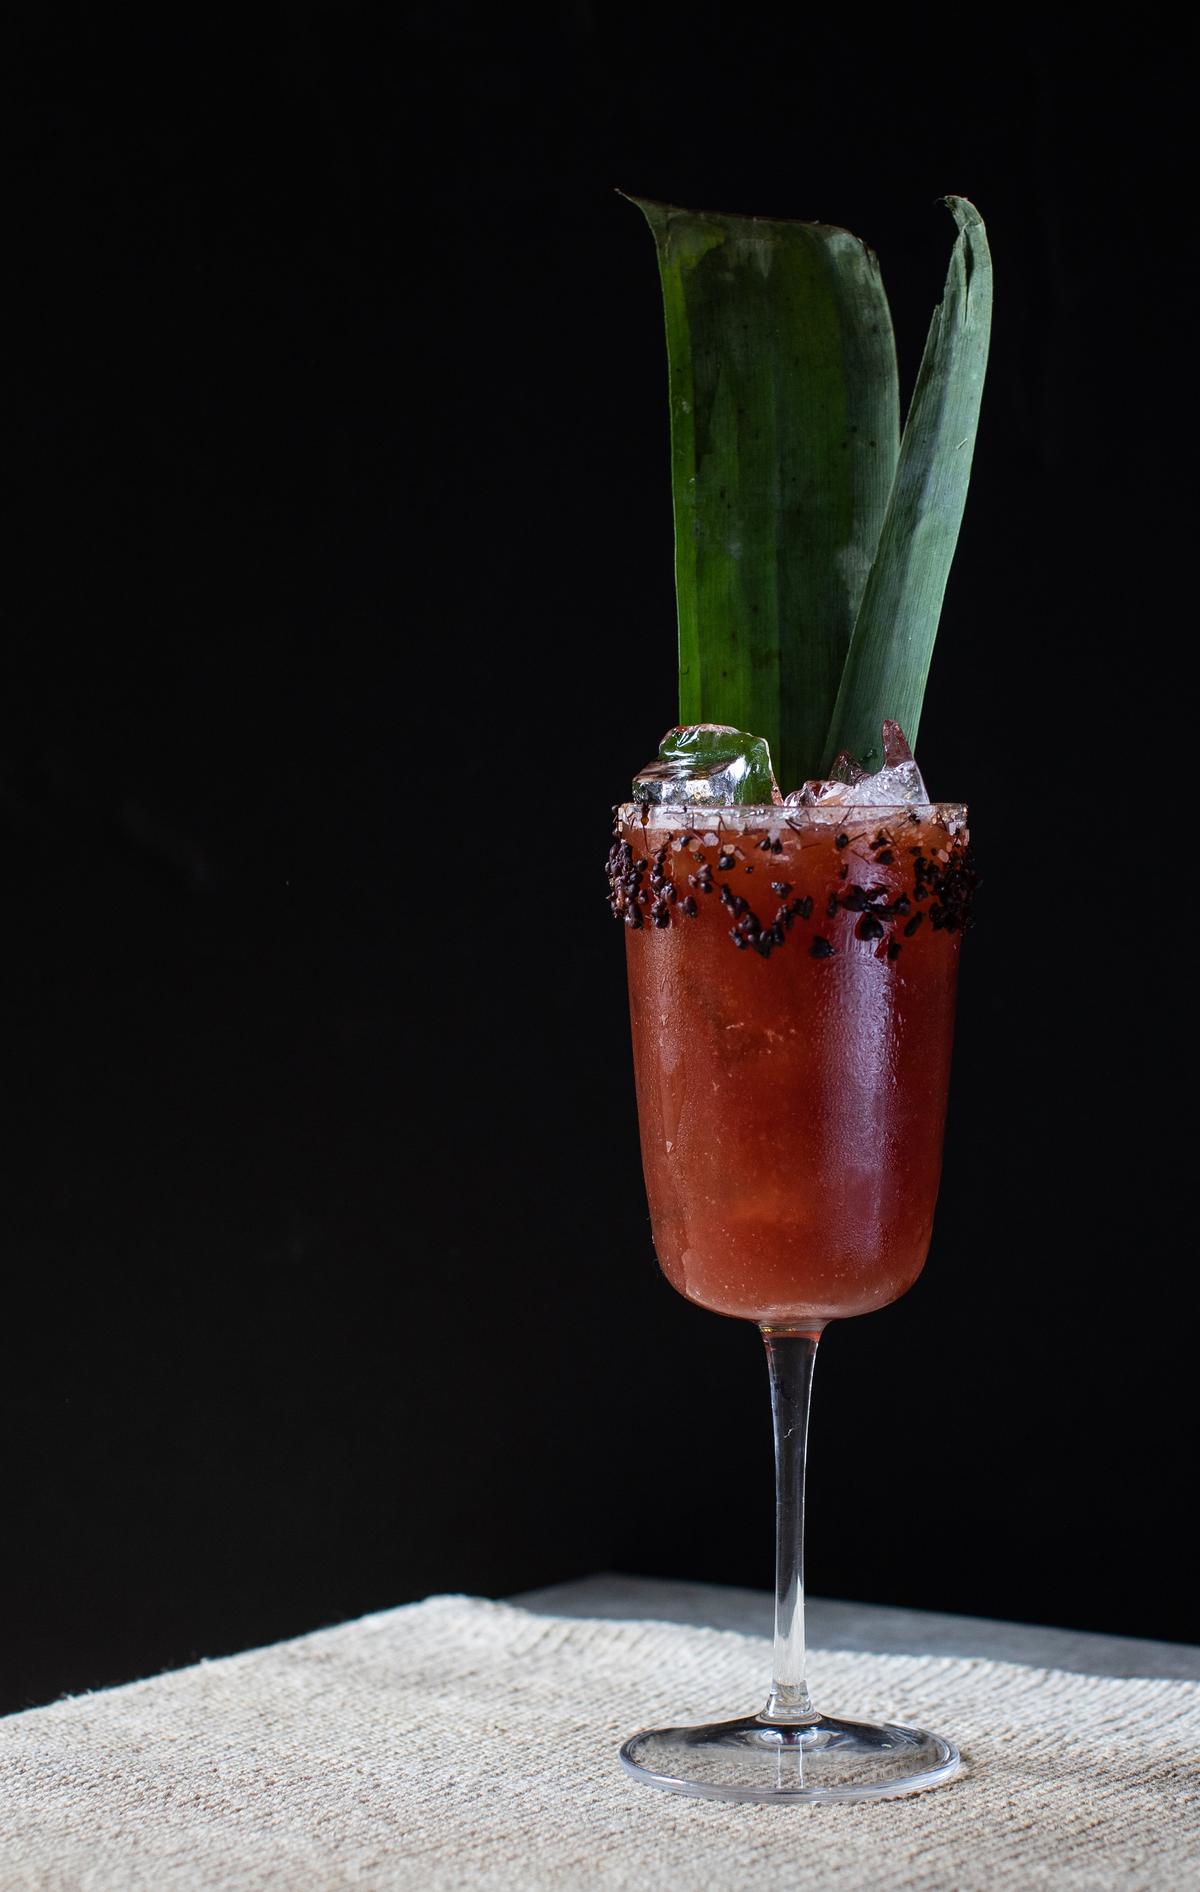 The beverage program, designed by Maja Griffin, focuses primarily on spirits and wines from South America and Spain. (Courtesy of Alma Cocina Latina)